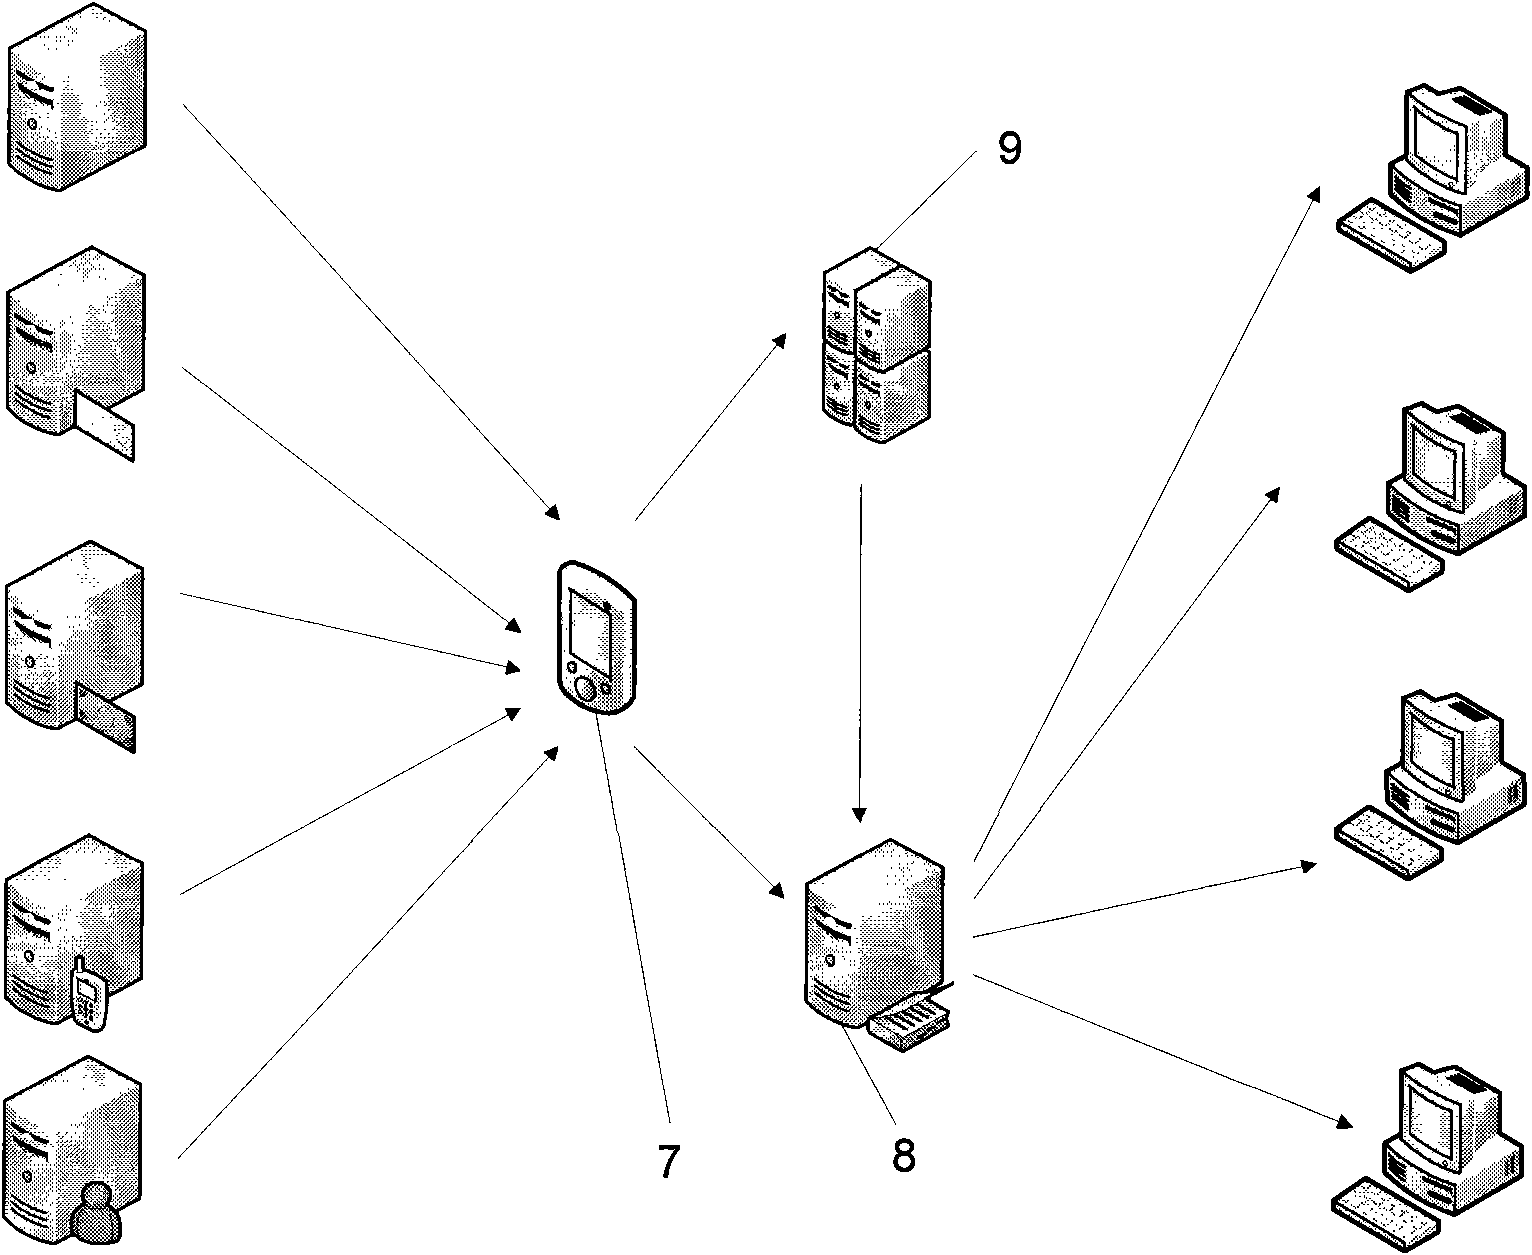 Automatic control method of enterprise IT infrastructures